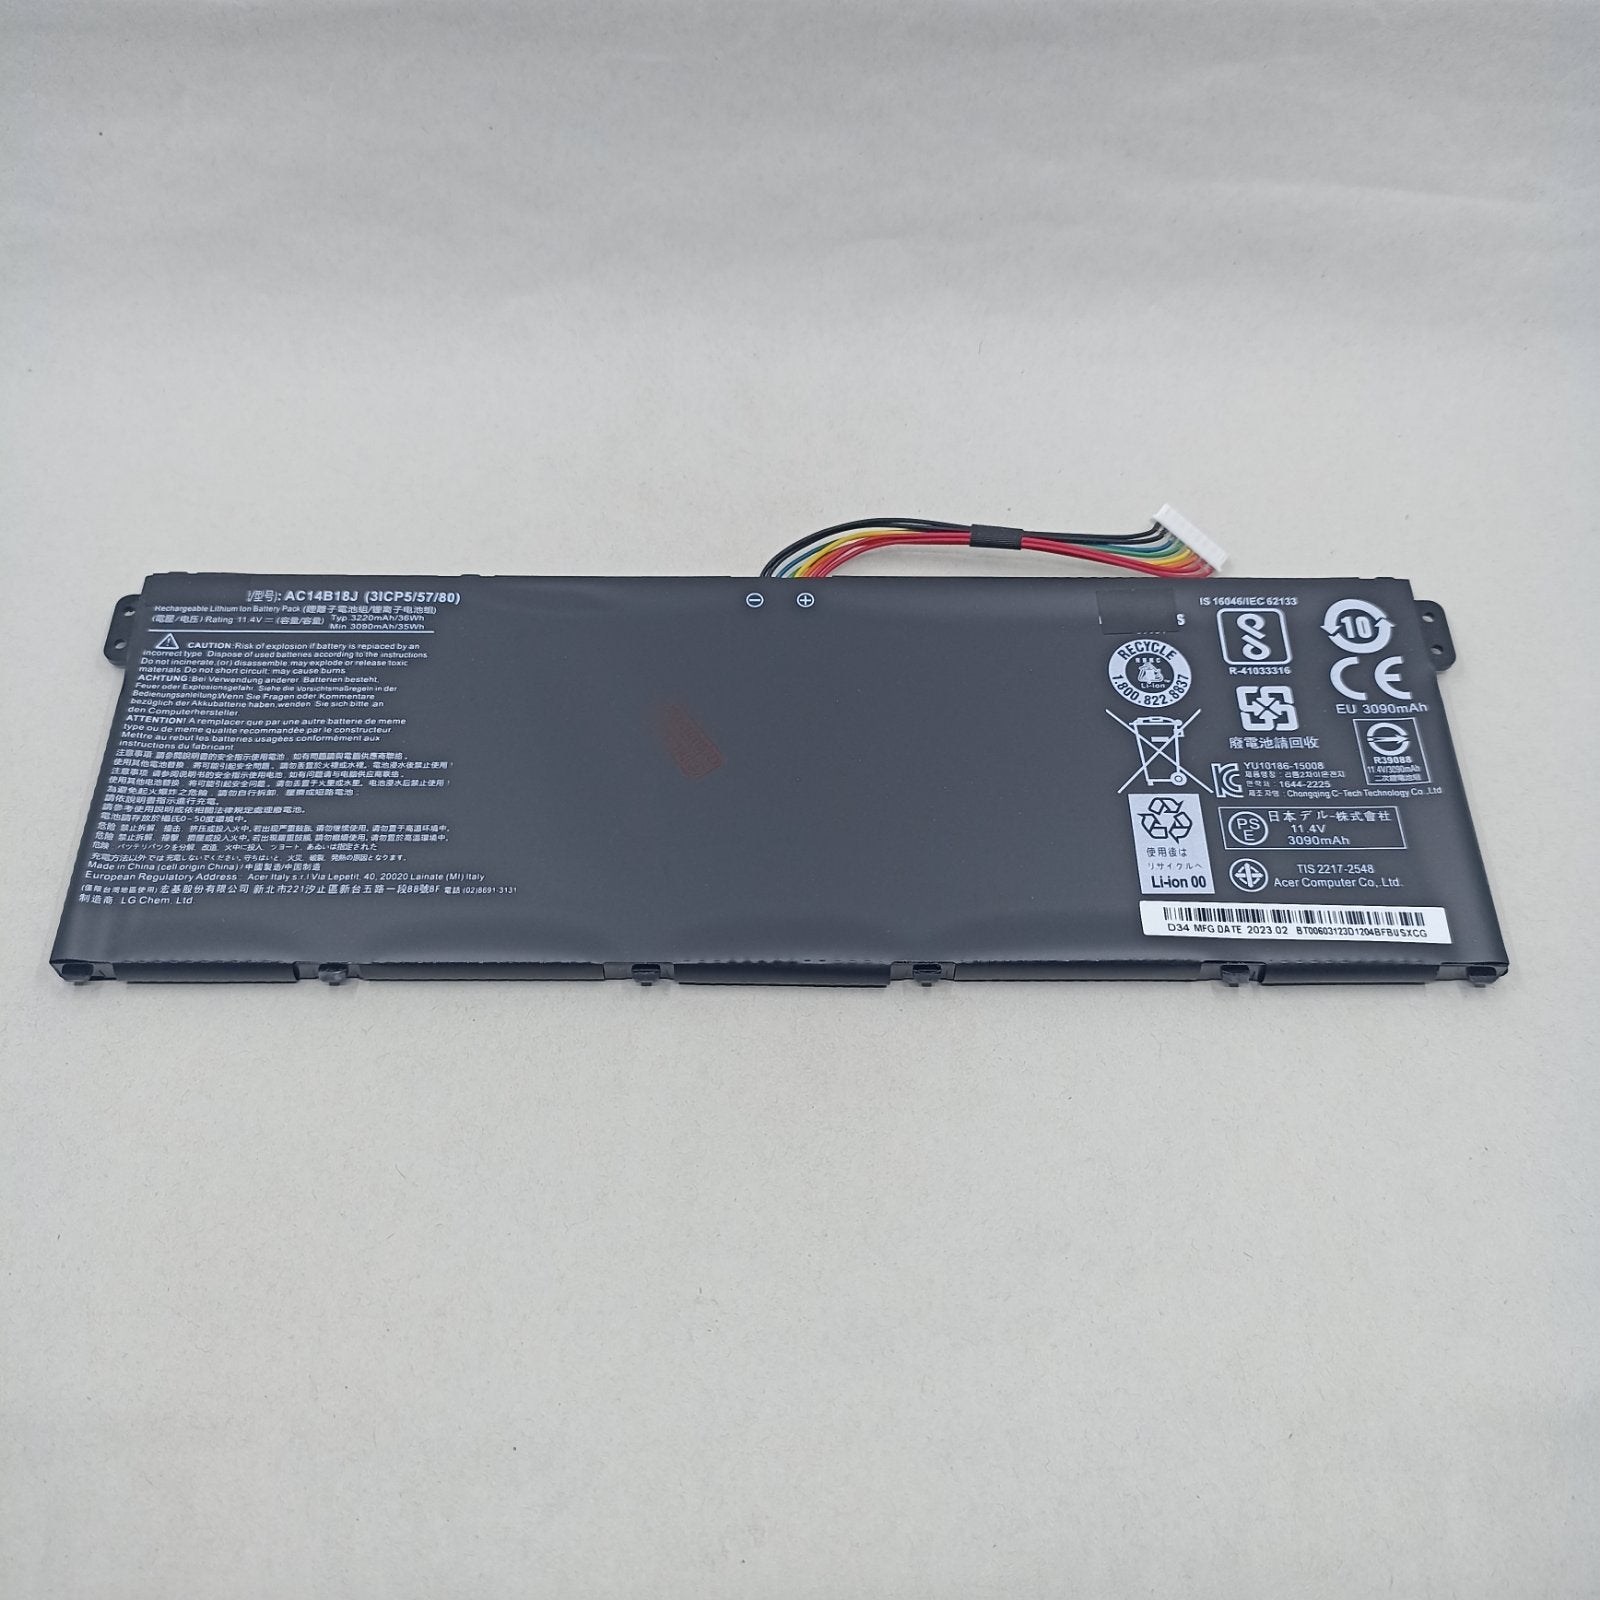 Replacement Battery for Acer A315-56 A1